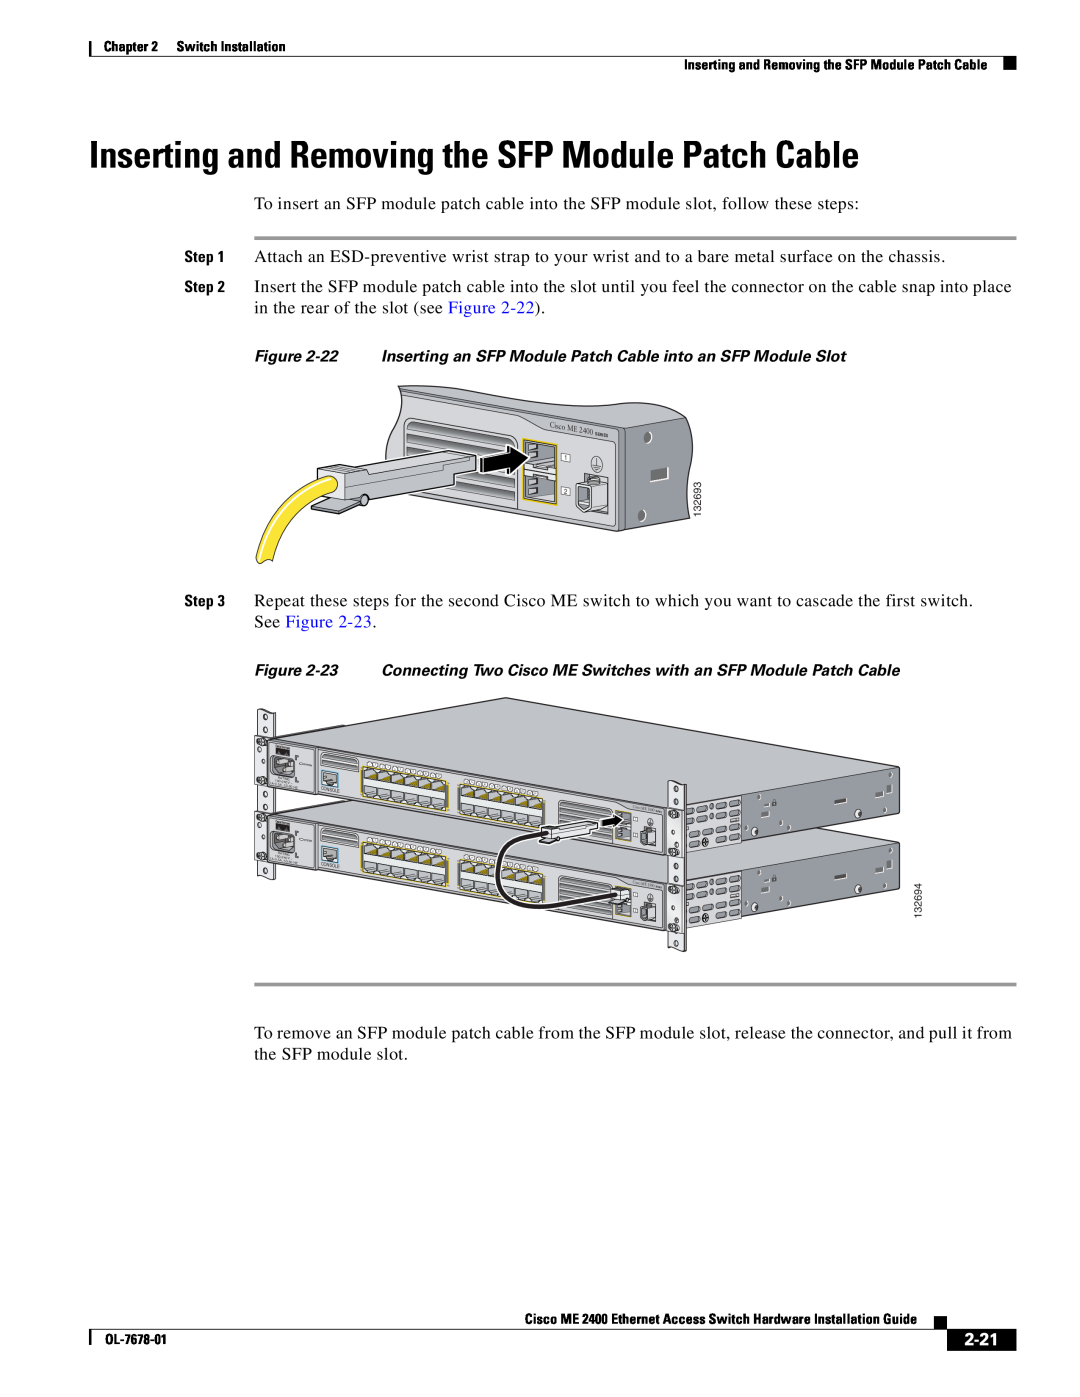 Cisco Systems ME 2400 manual Inserting and Removing the SFP Module Patch Cable, 2-21 